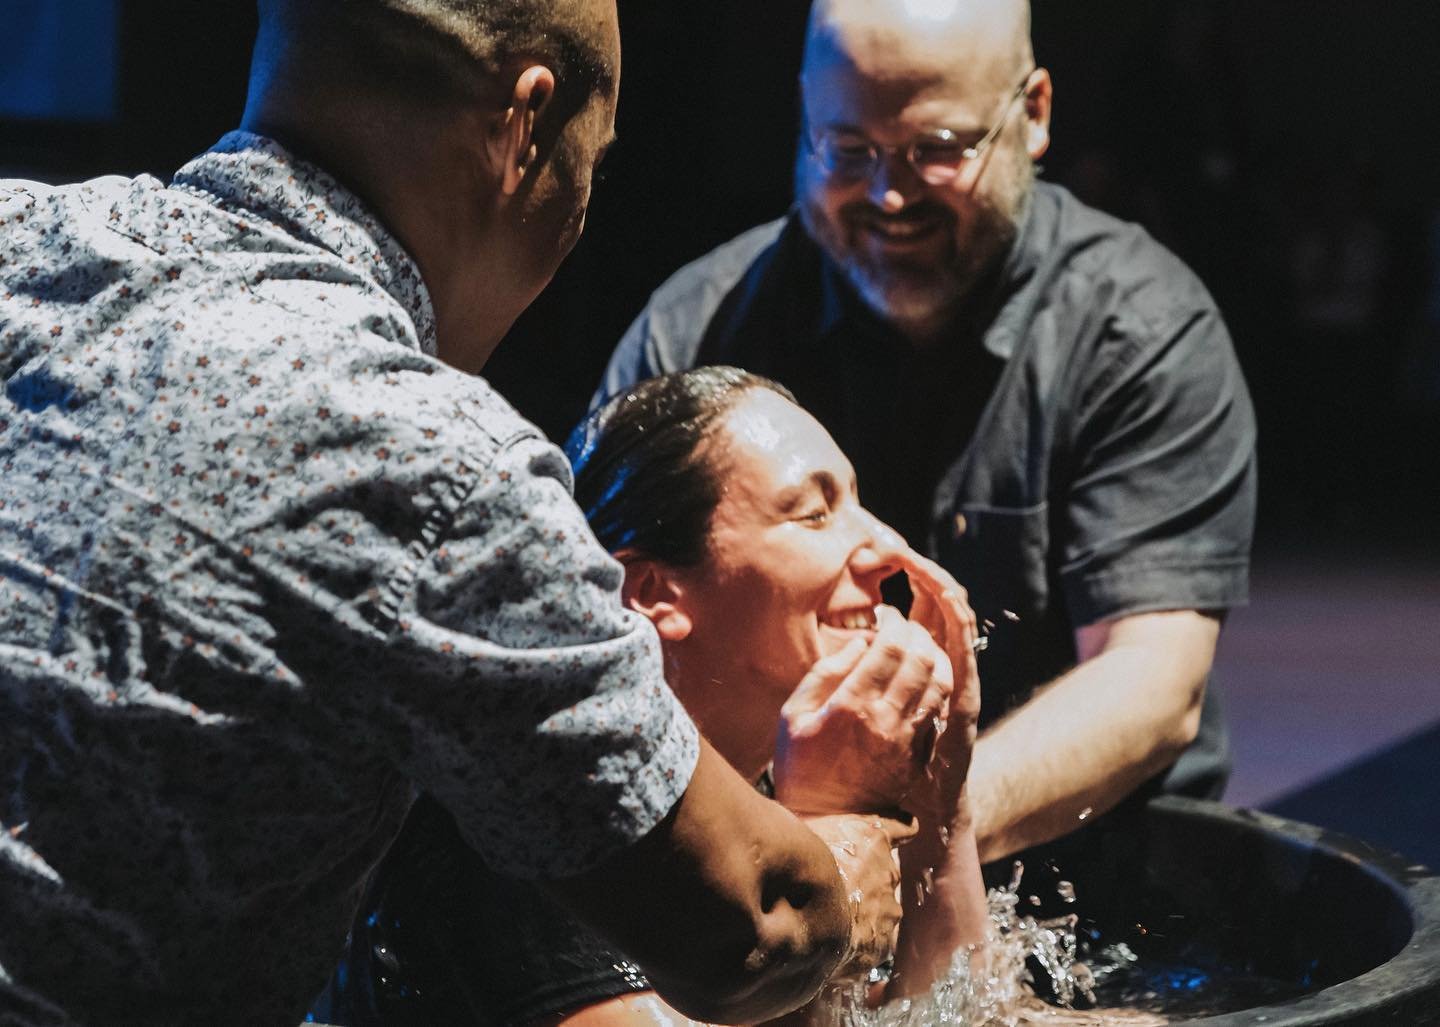 Baptism Sunday is our favorite! If you or a loved one feel called to partake in this meaningful faith moment, we welcome you with open arms and warm hearts. Please reach out to us for more information if you are interested in getting baptized.